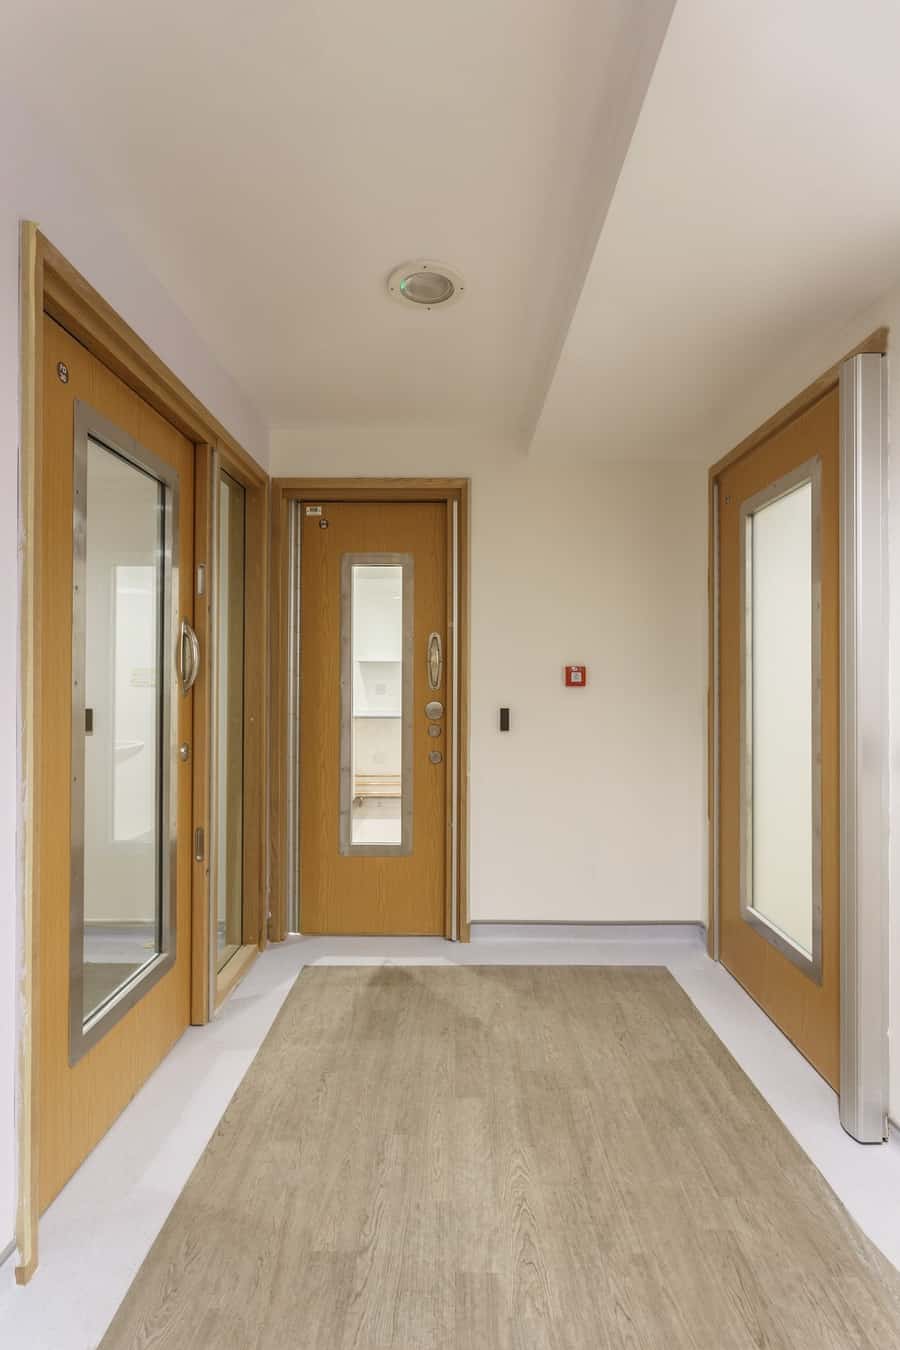  Anti-ligature doors in a hospital by Rick McEvoy Construction Product Photographer  